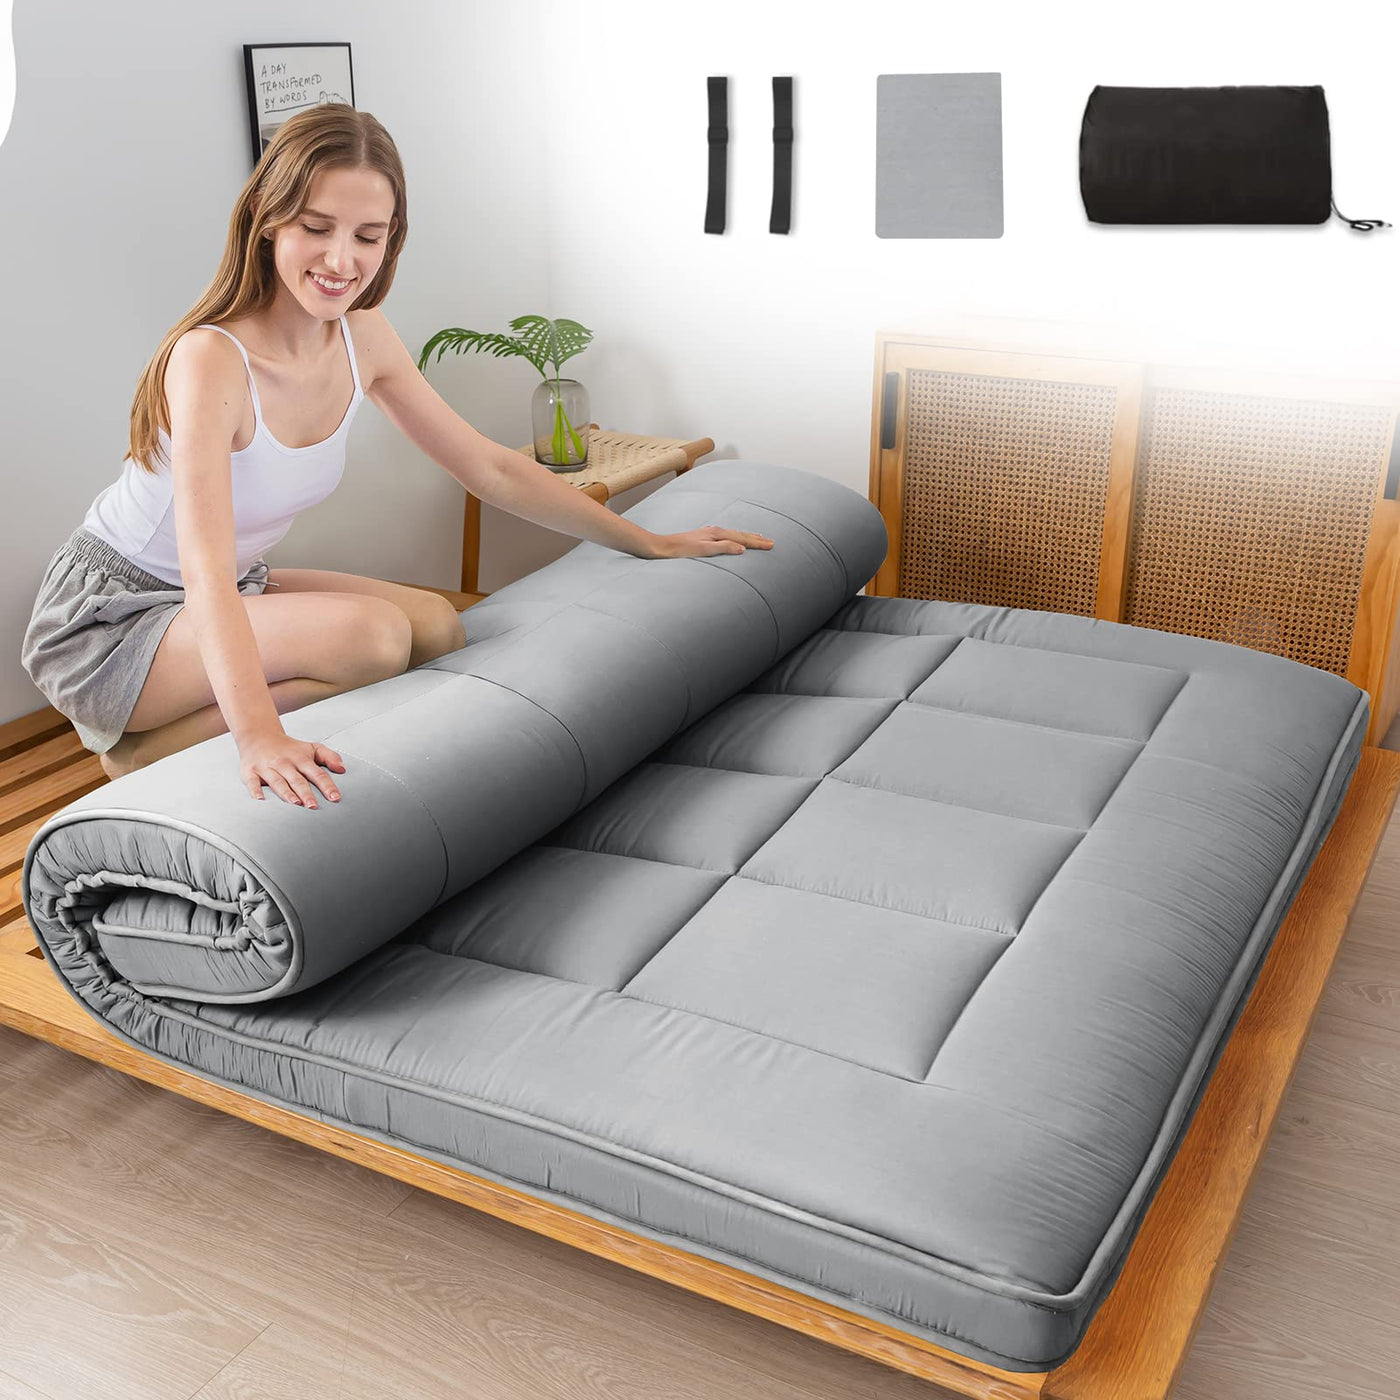 MAXYOYO Japanese Floor Mattress for Adults, 4" Thick Roll Up Floor Bed Futon Mattress Shikibuton, Grey